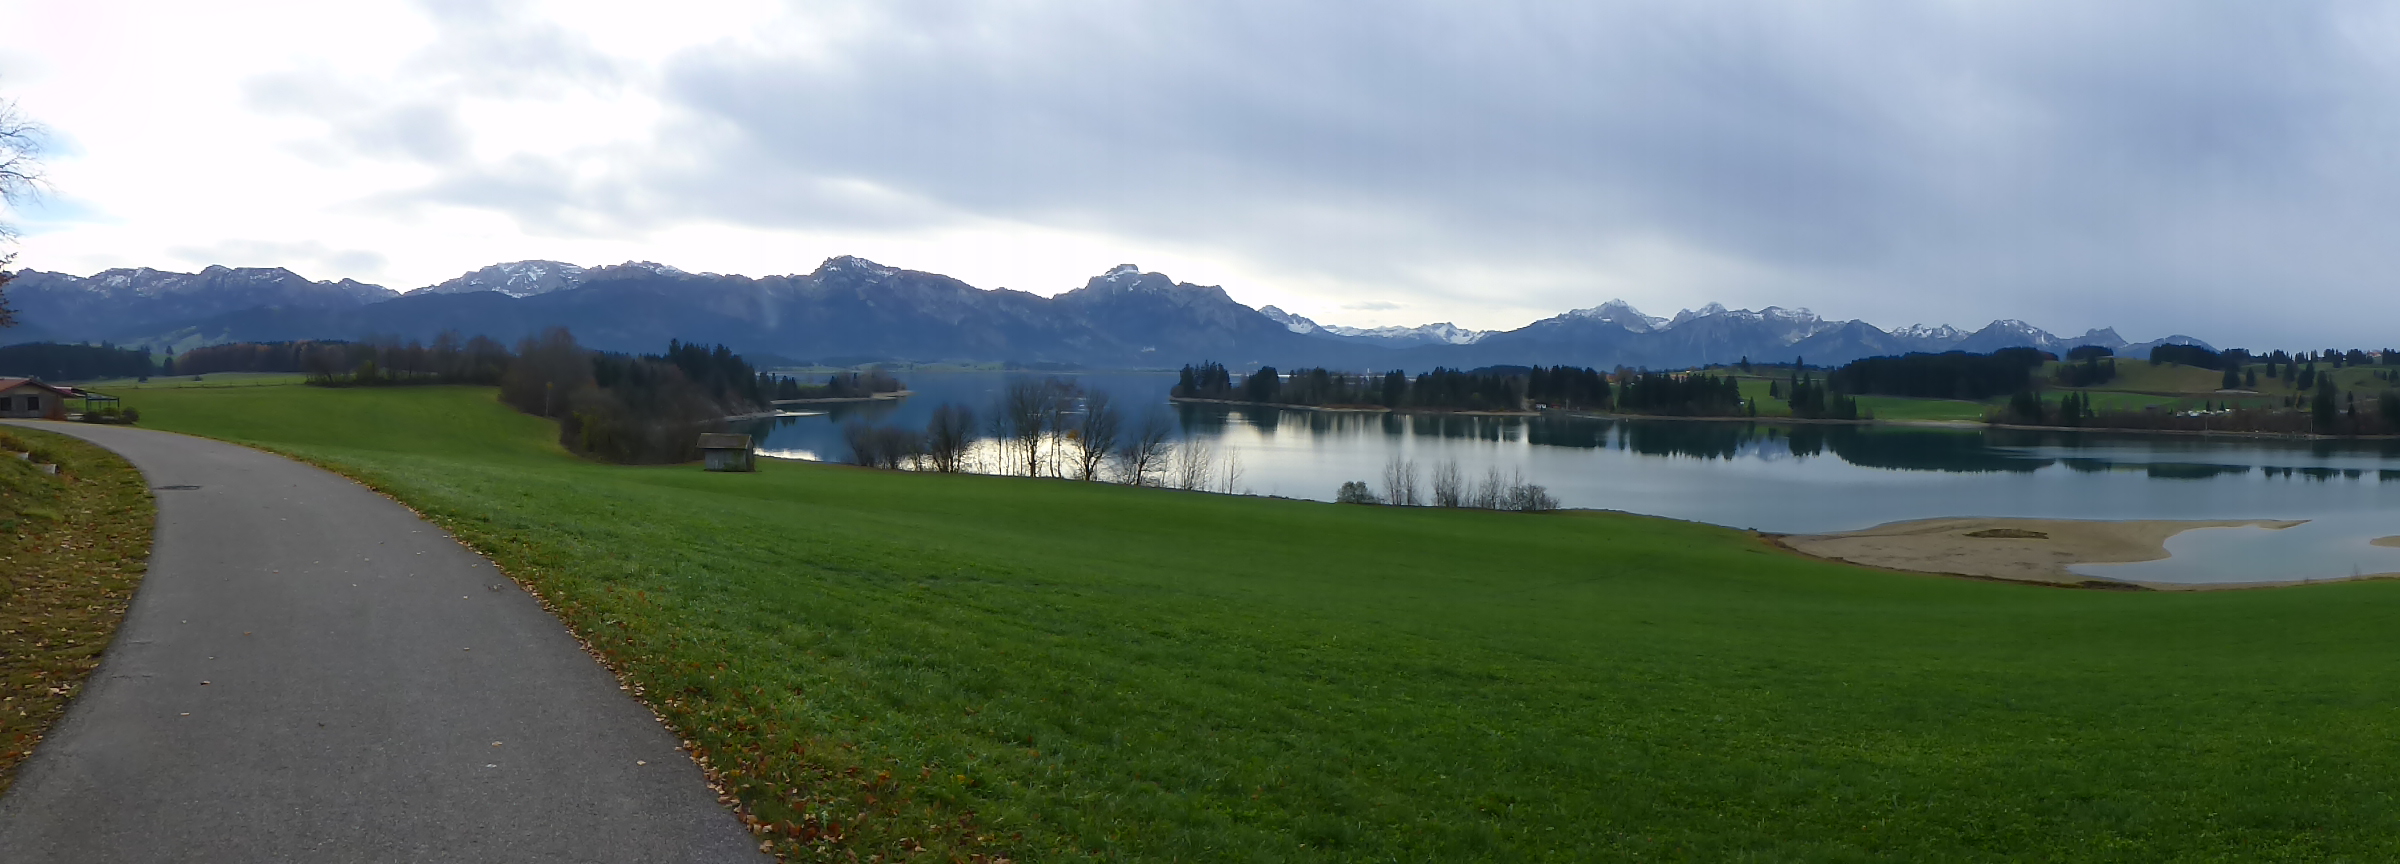 Panorama Forggensee (23.11.2014) Blickrichtung: Sd